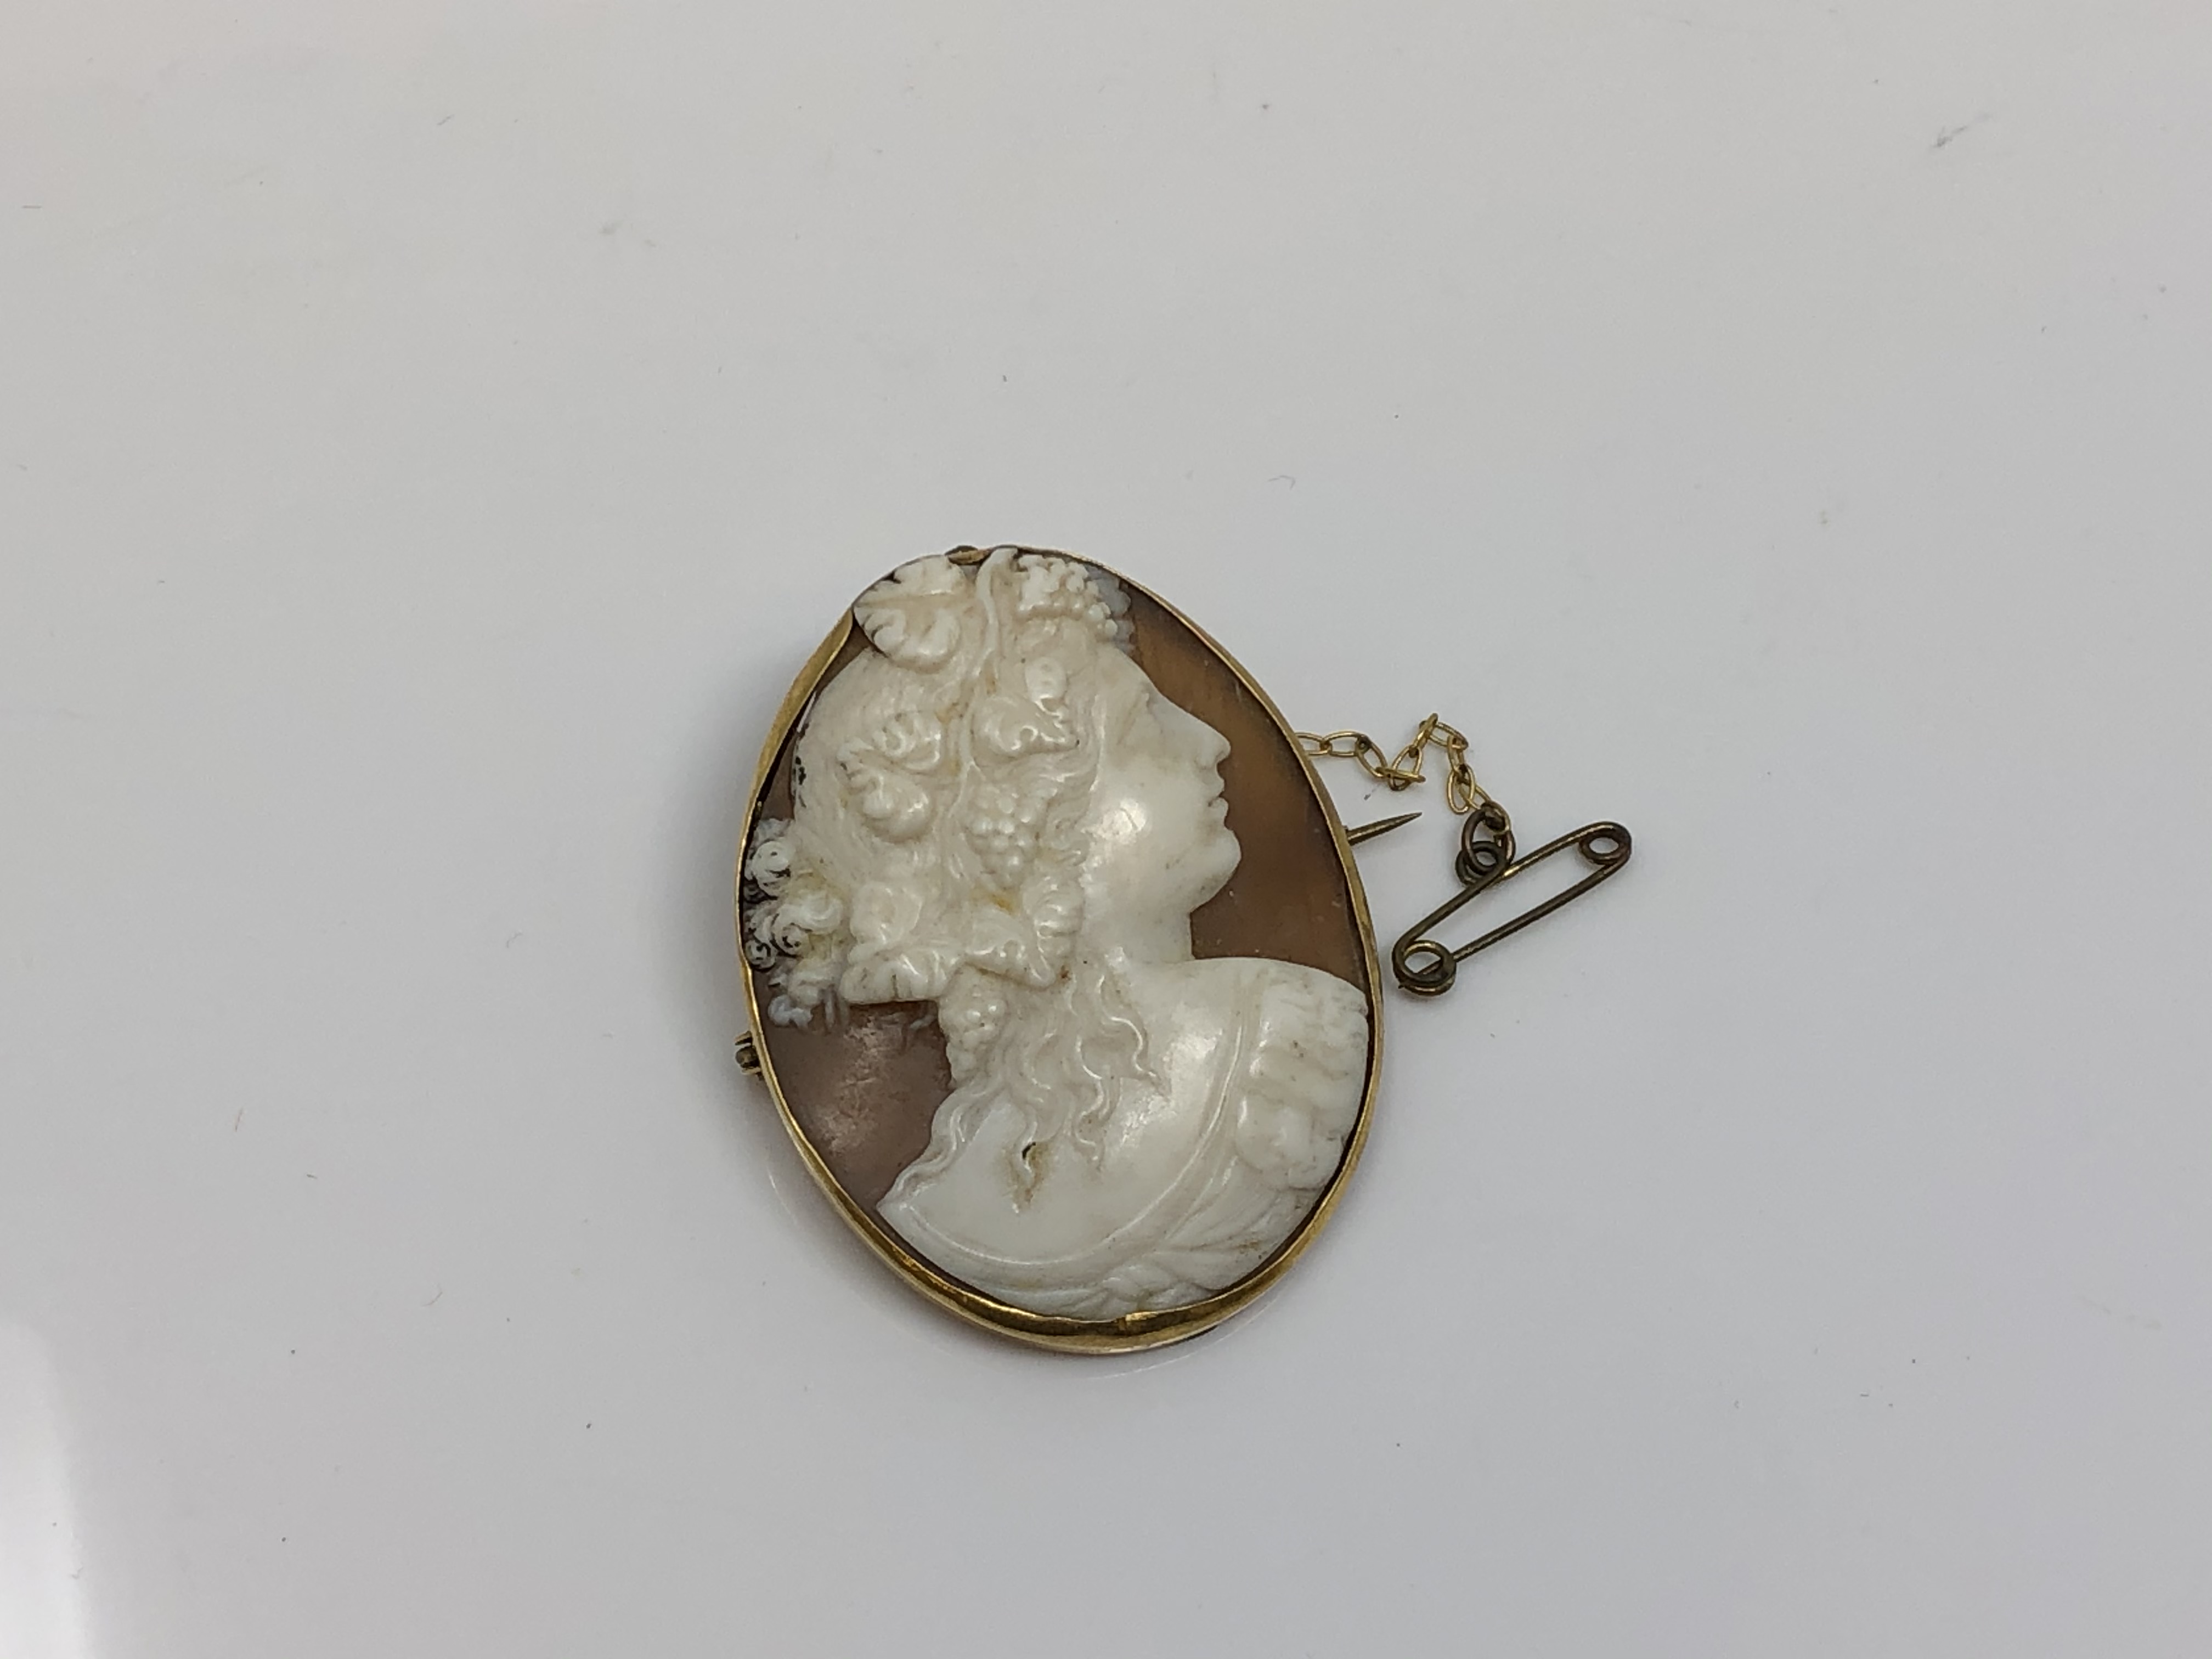 A yellow gold cameo brooch